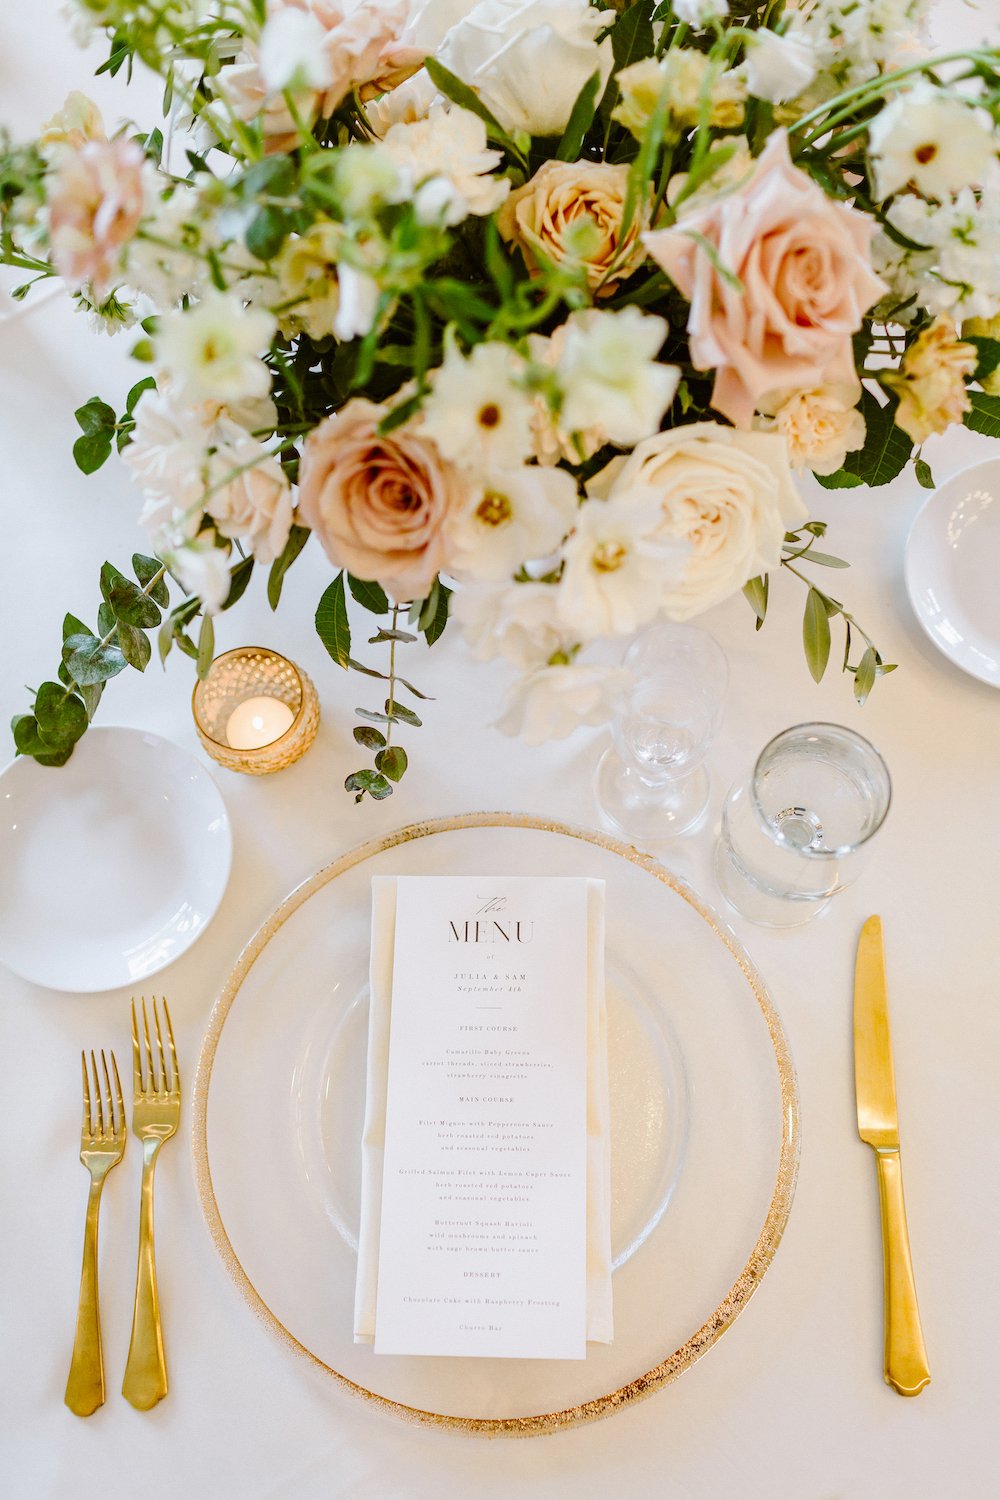 Garden wedding floral table setting at the Spanish Hills Country Club in Los Angeles.